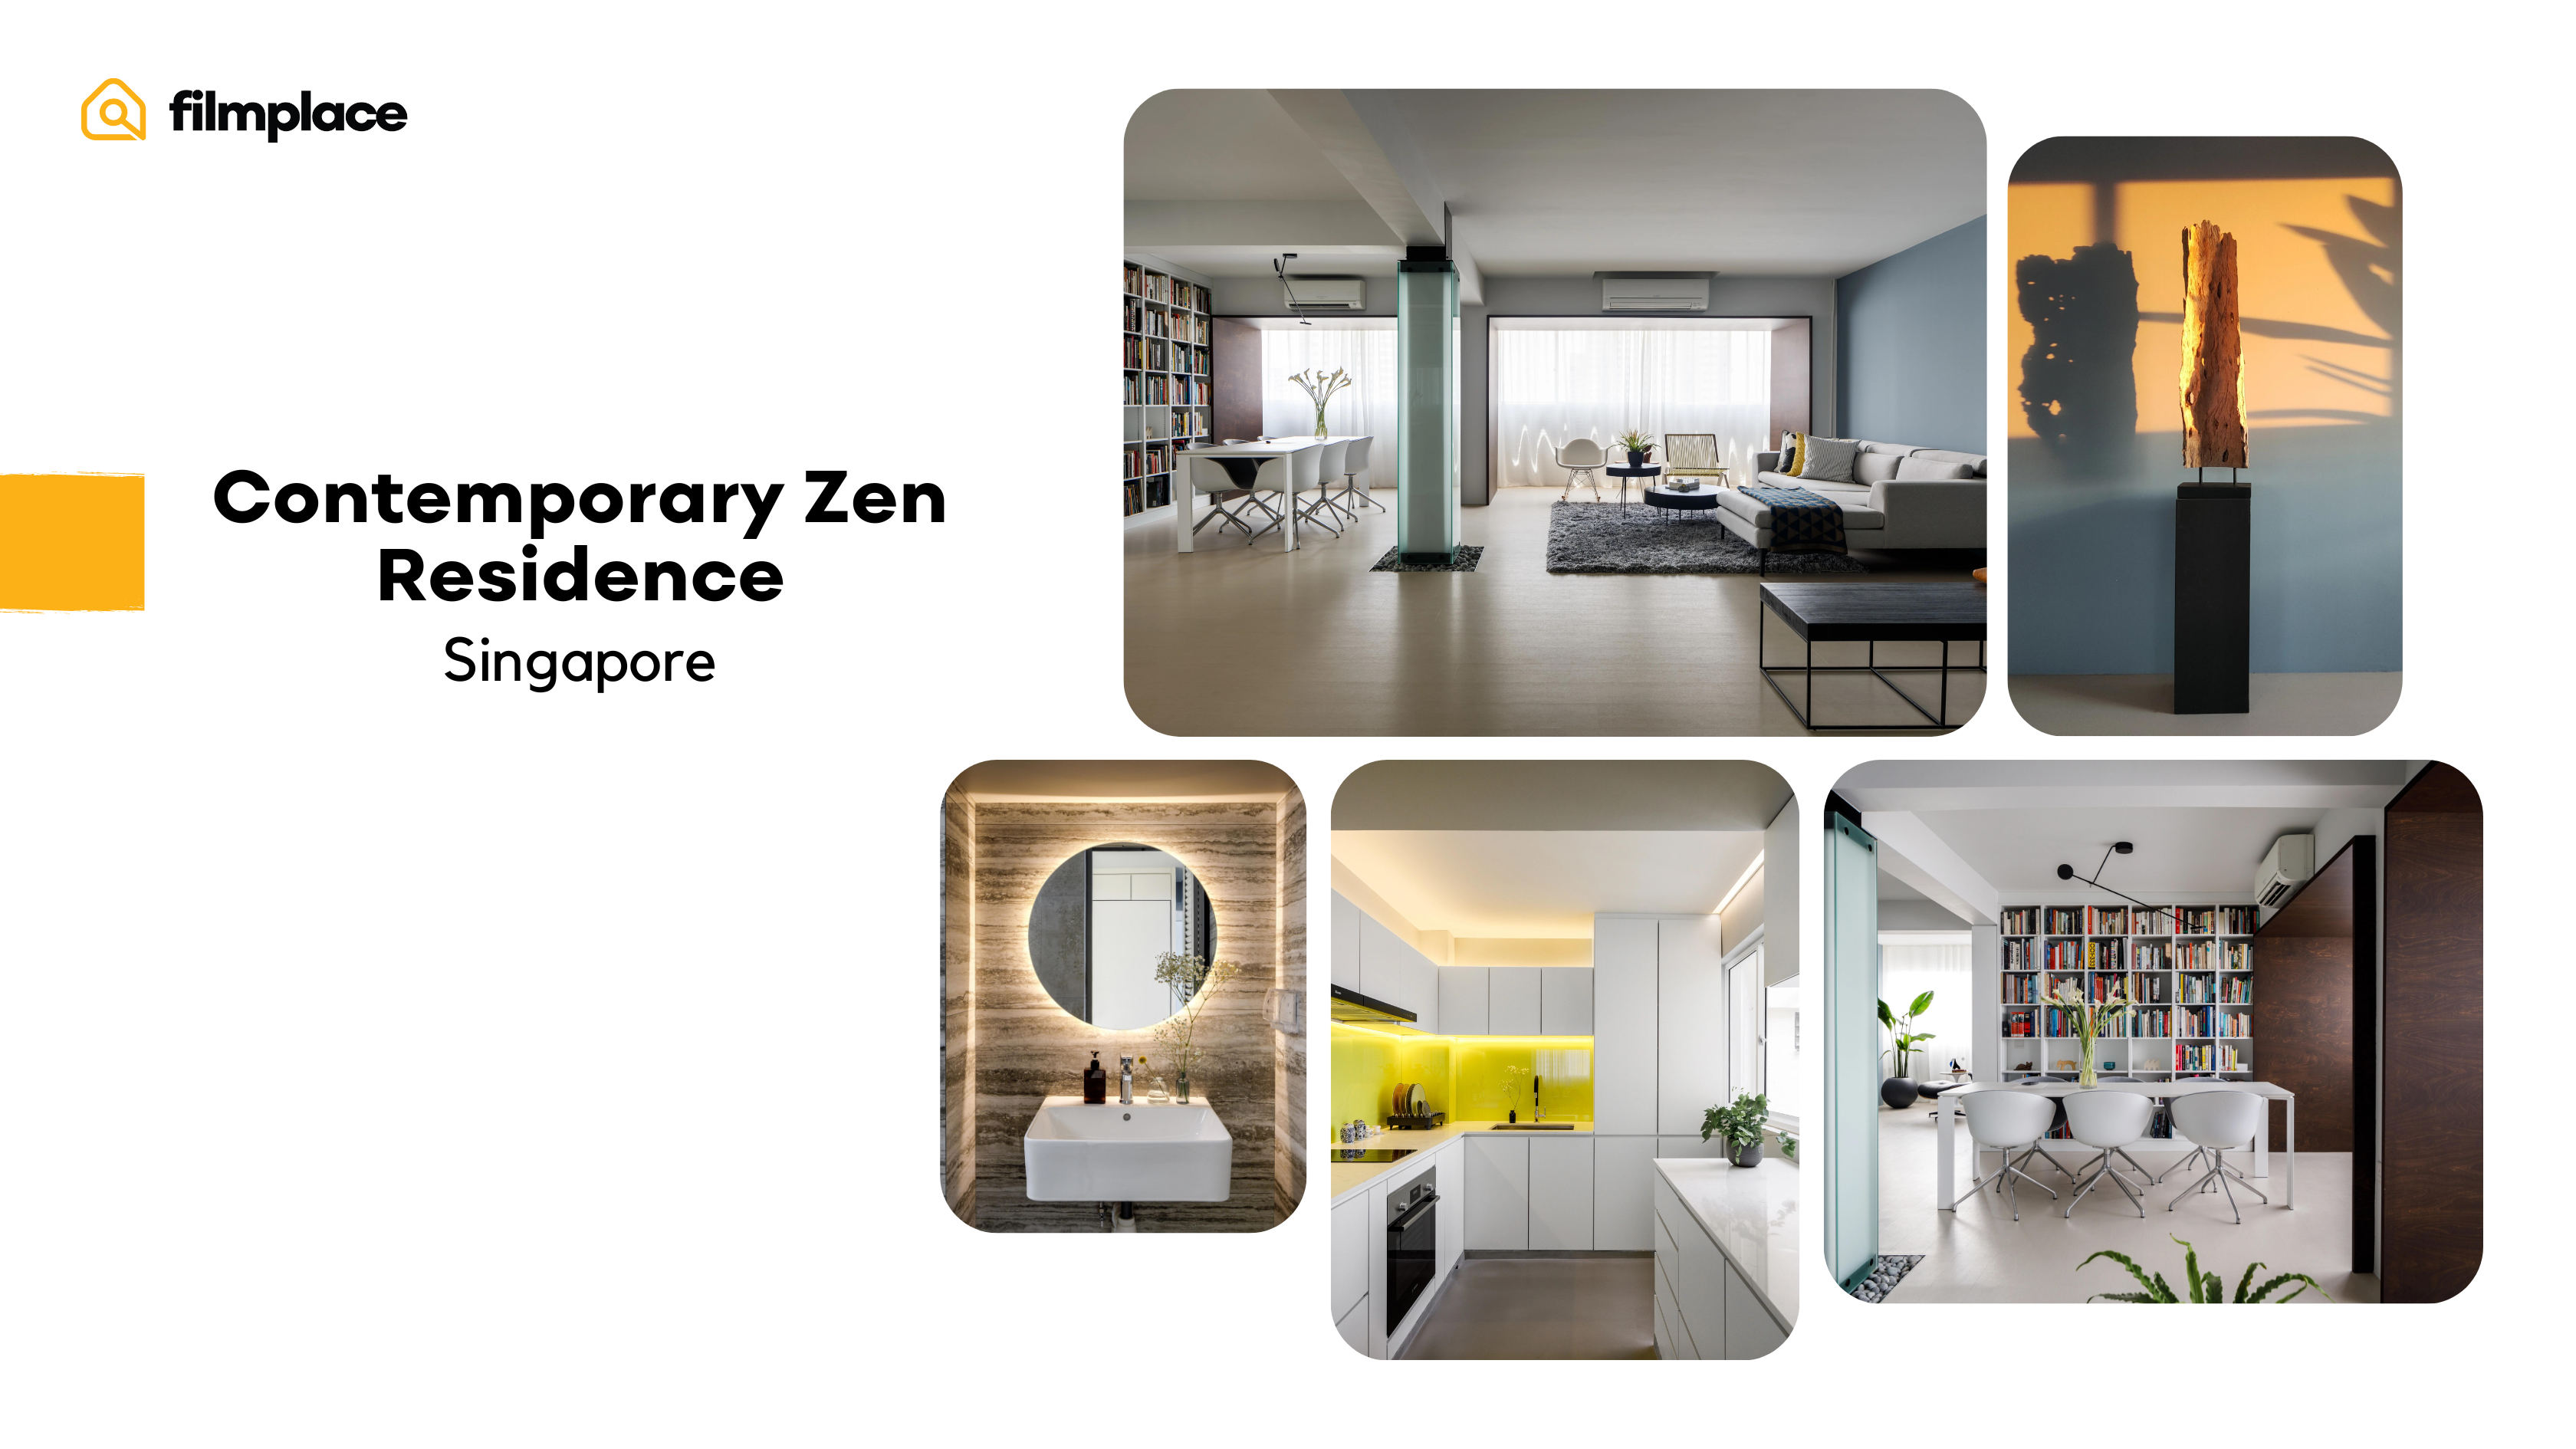 Filmplace second top film location pick april: listing 12366 contemporary zen residence in Singapore photo collage